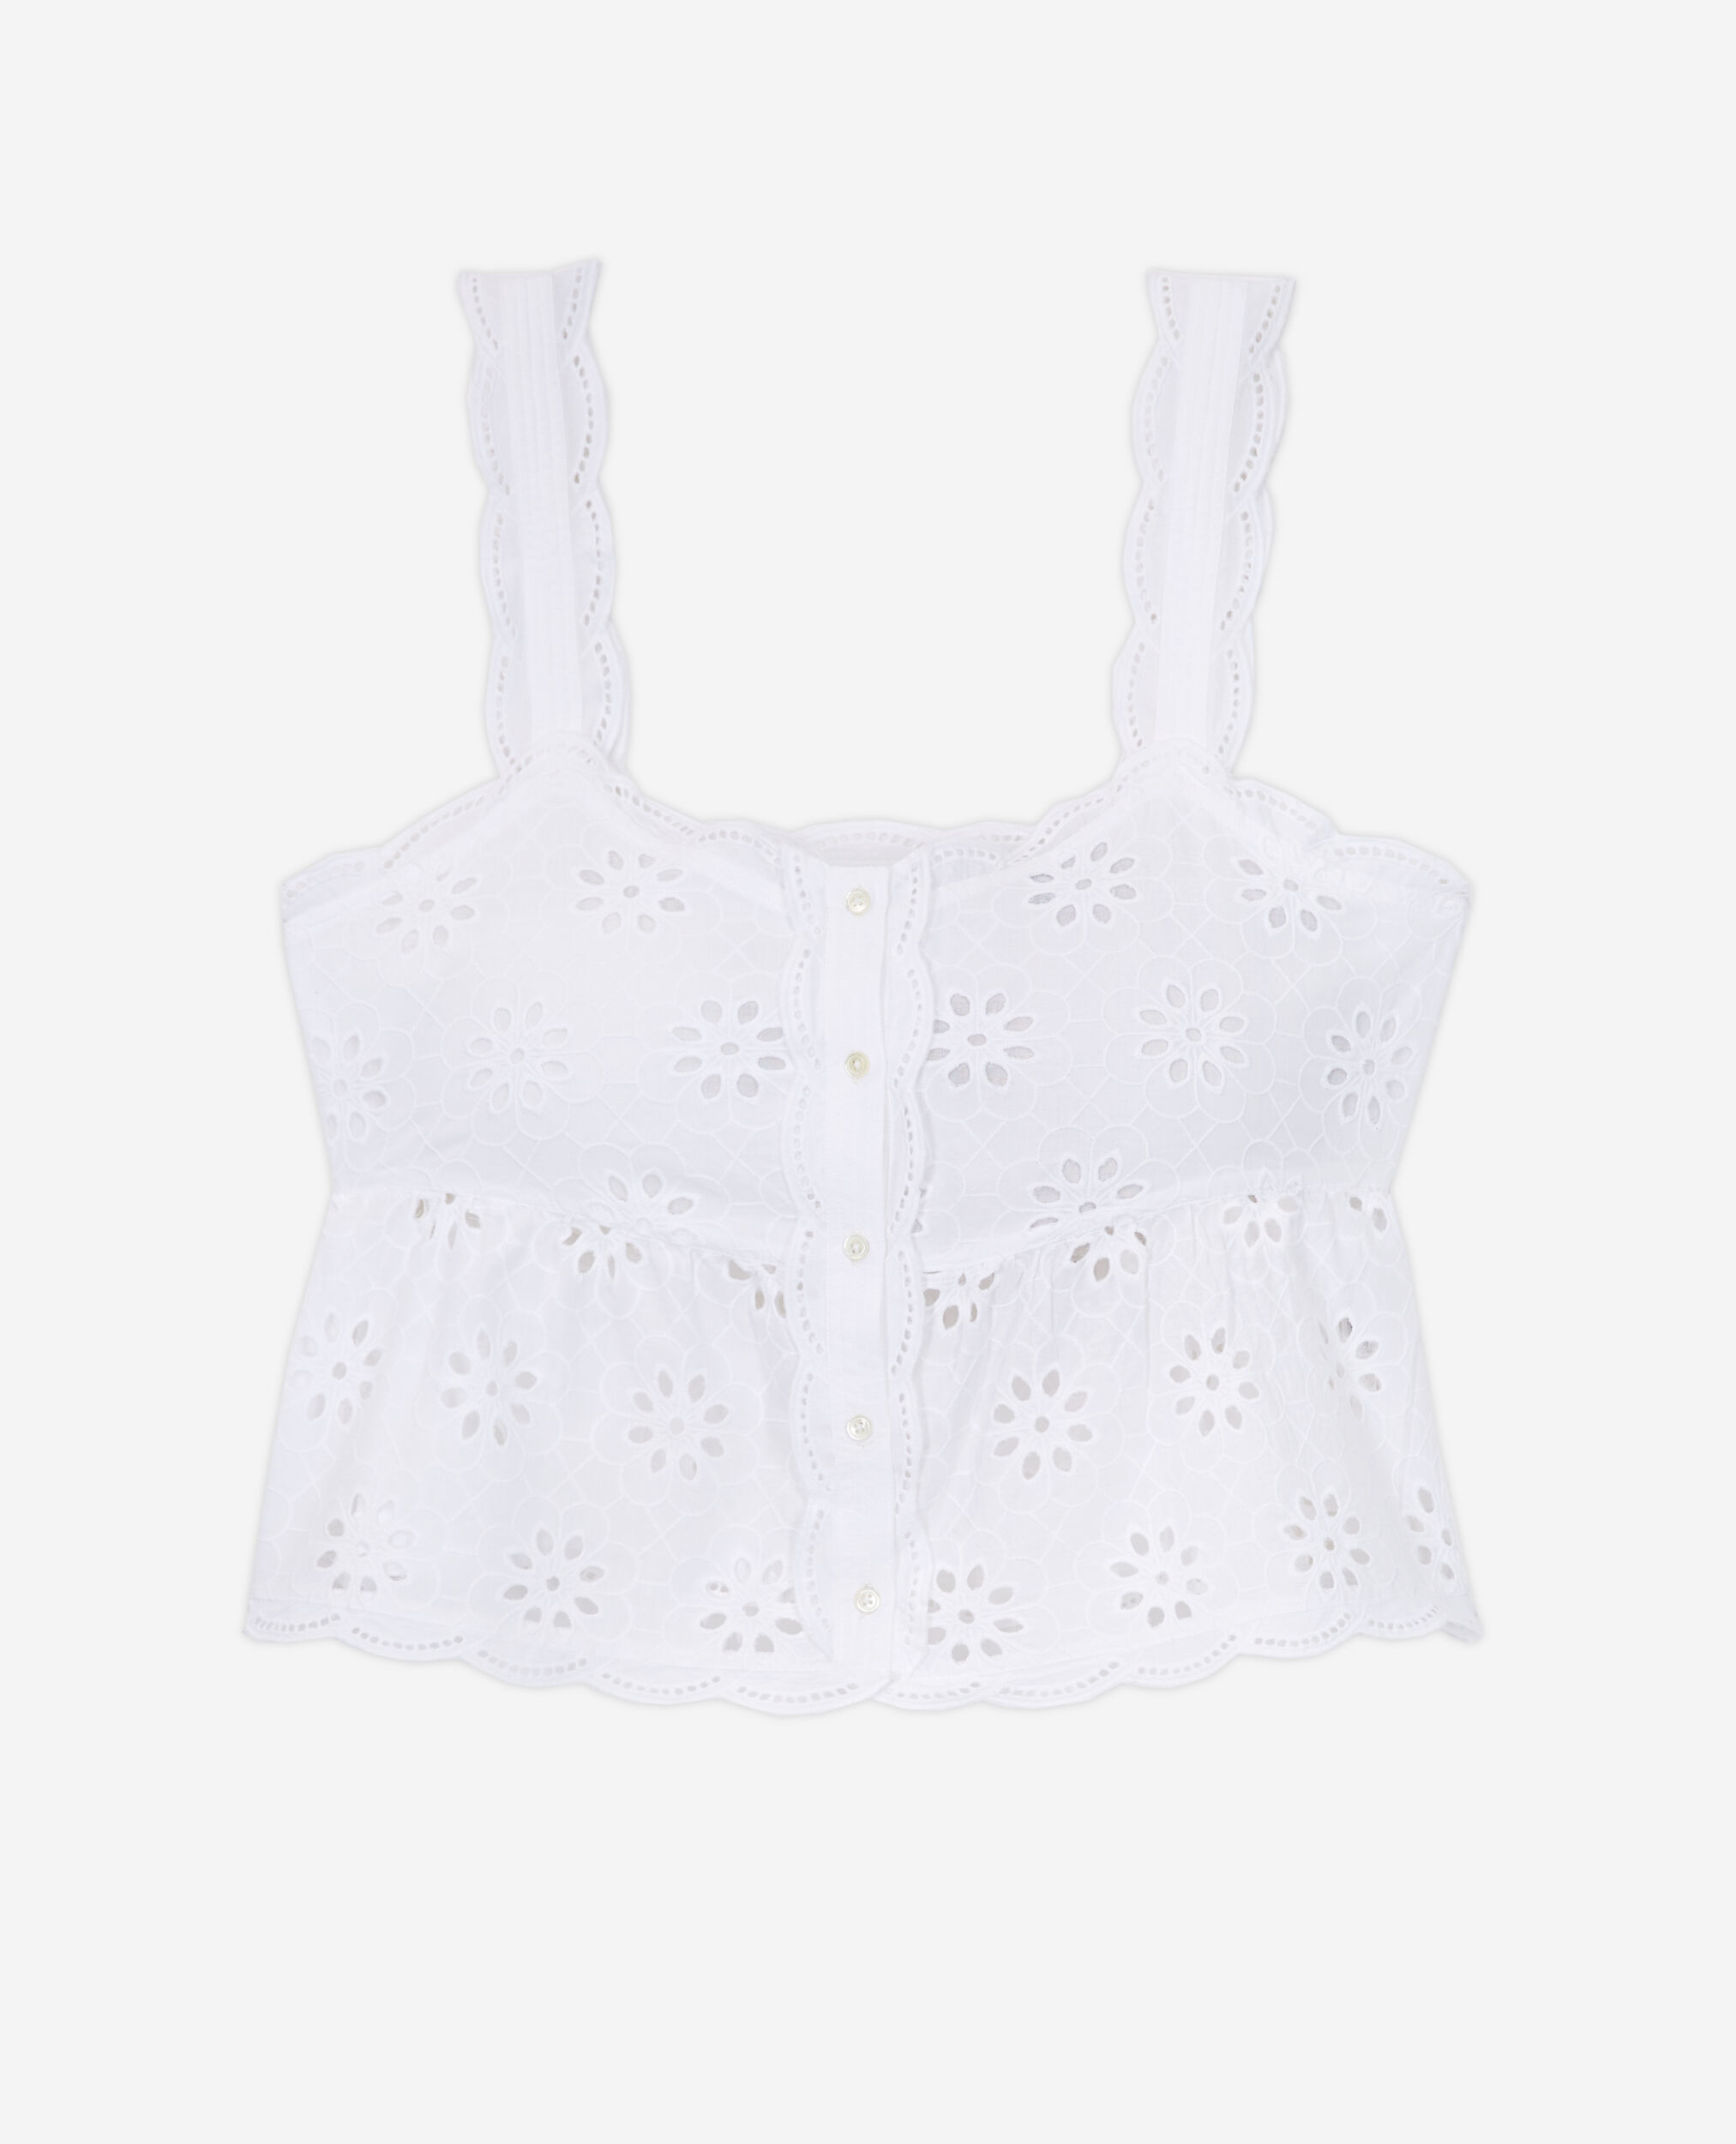 Top court blanc en Broderie Anglaise, WHITE, hi-res image number null